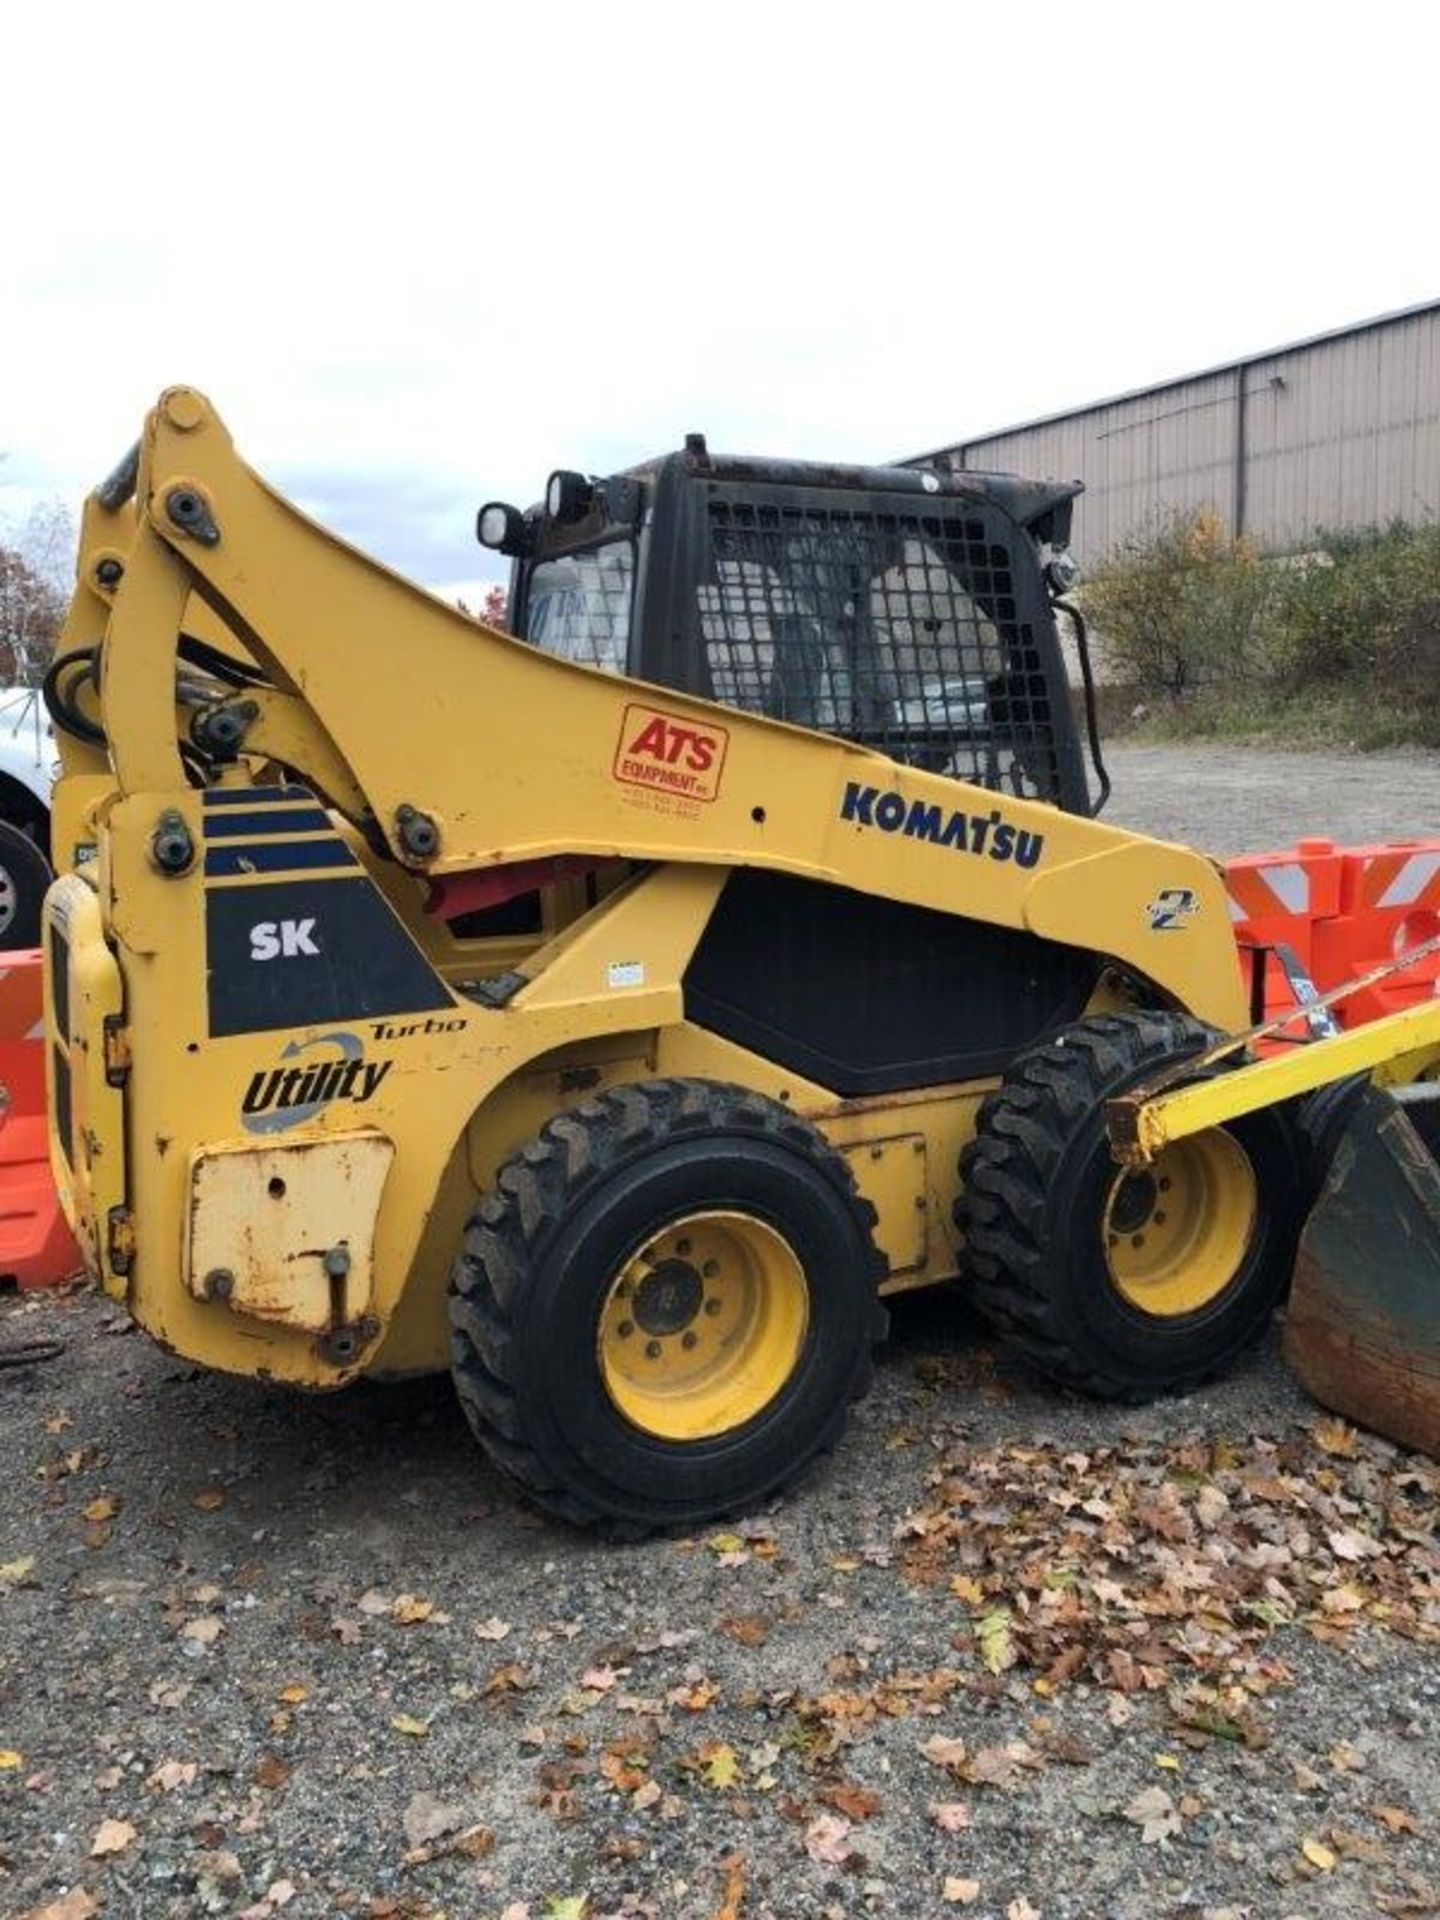 Komatsu Skid Steer #SK1026, S/N:A80436 w/Bucket Attachments & Forks S/N: A80436 - Image 2 of 7